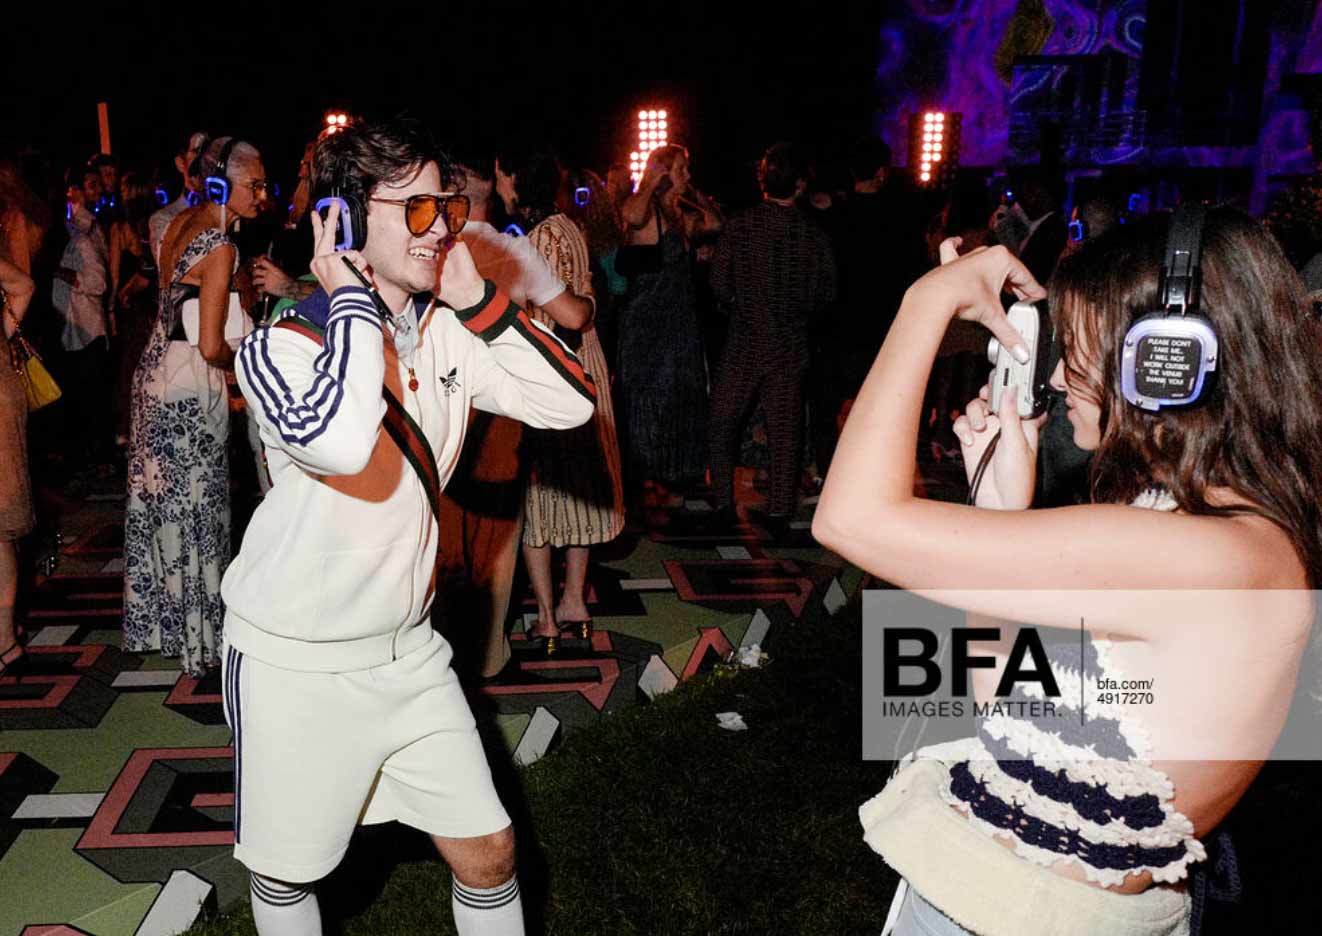 Party goers with silent disco headphones at Gucci party